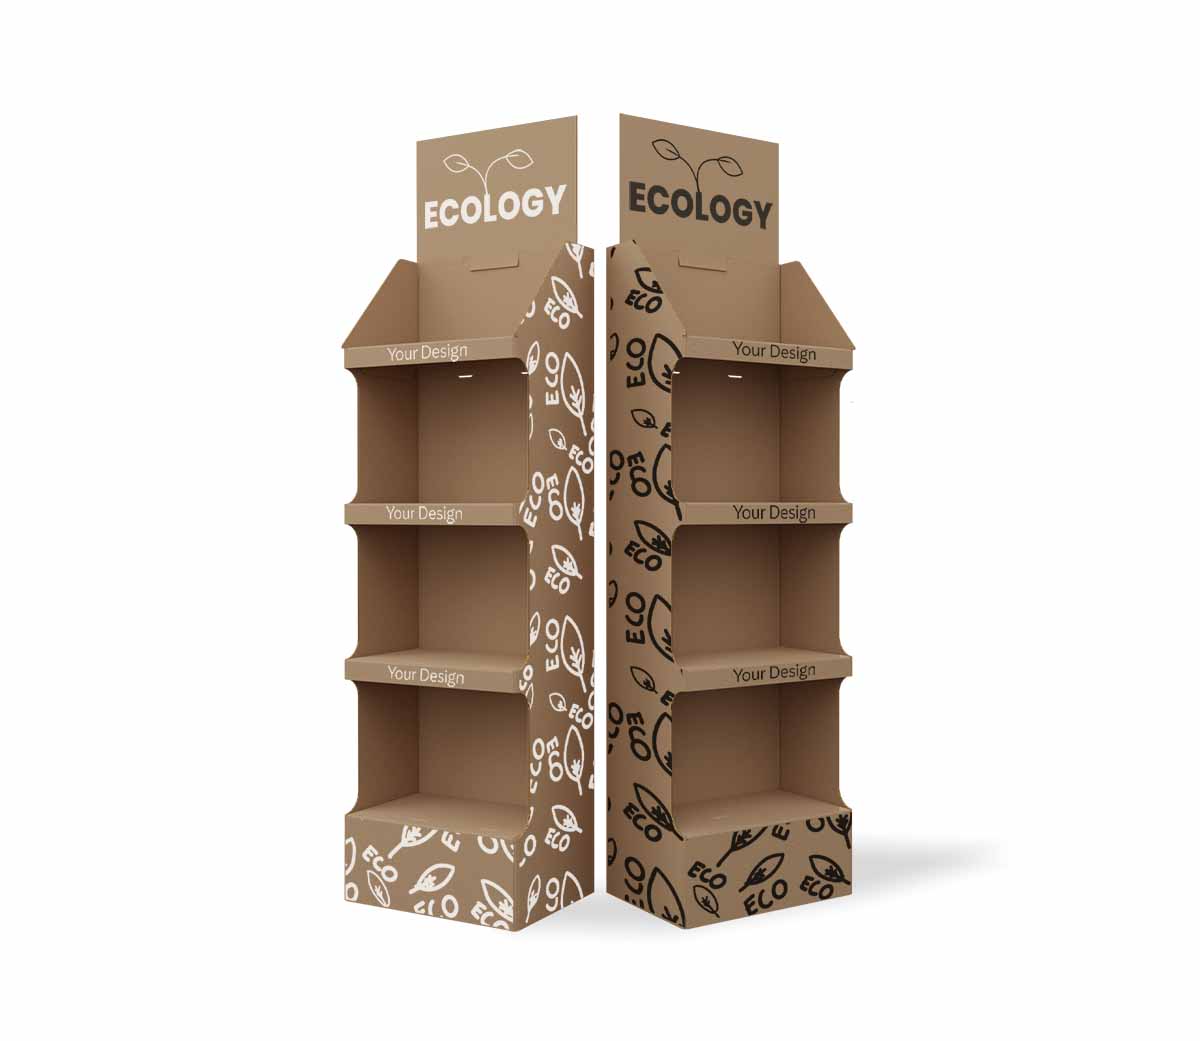 Stand Topper Eco 1 - Cardboard display stand eco 41 x 28,50 x 131 cm